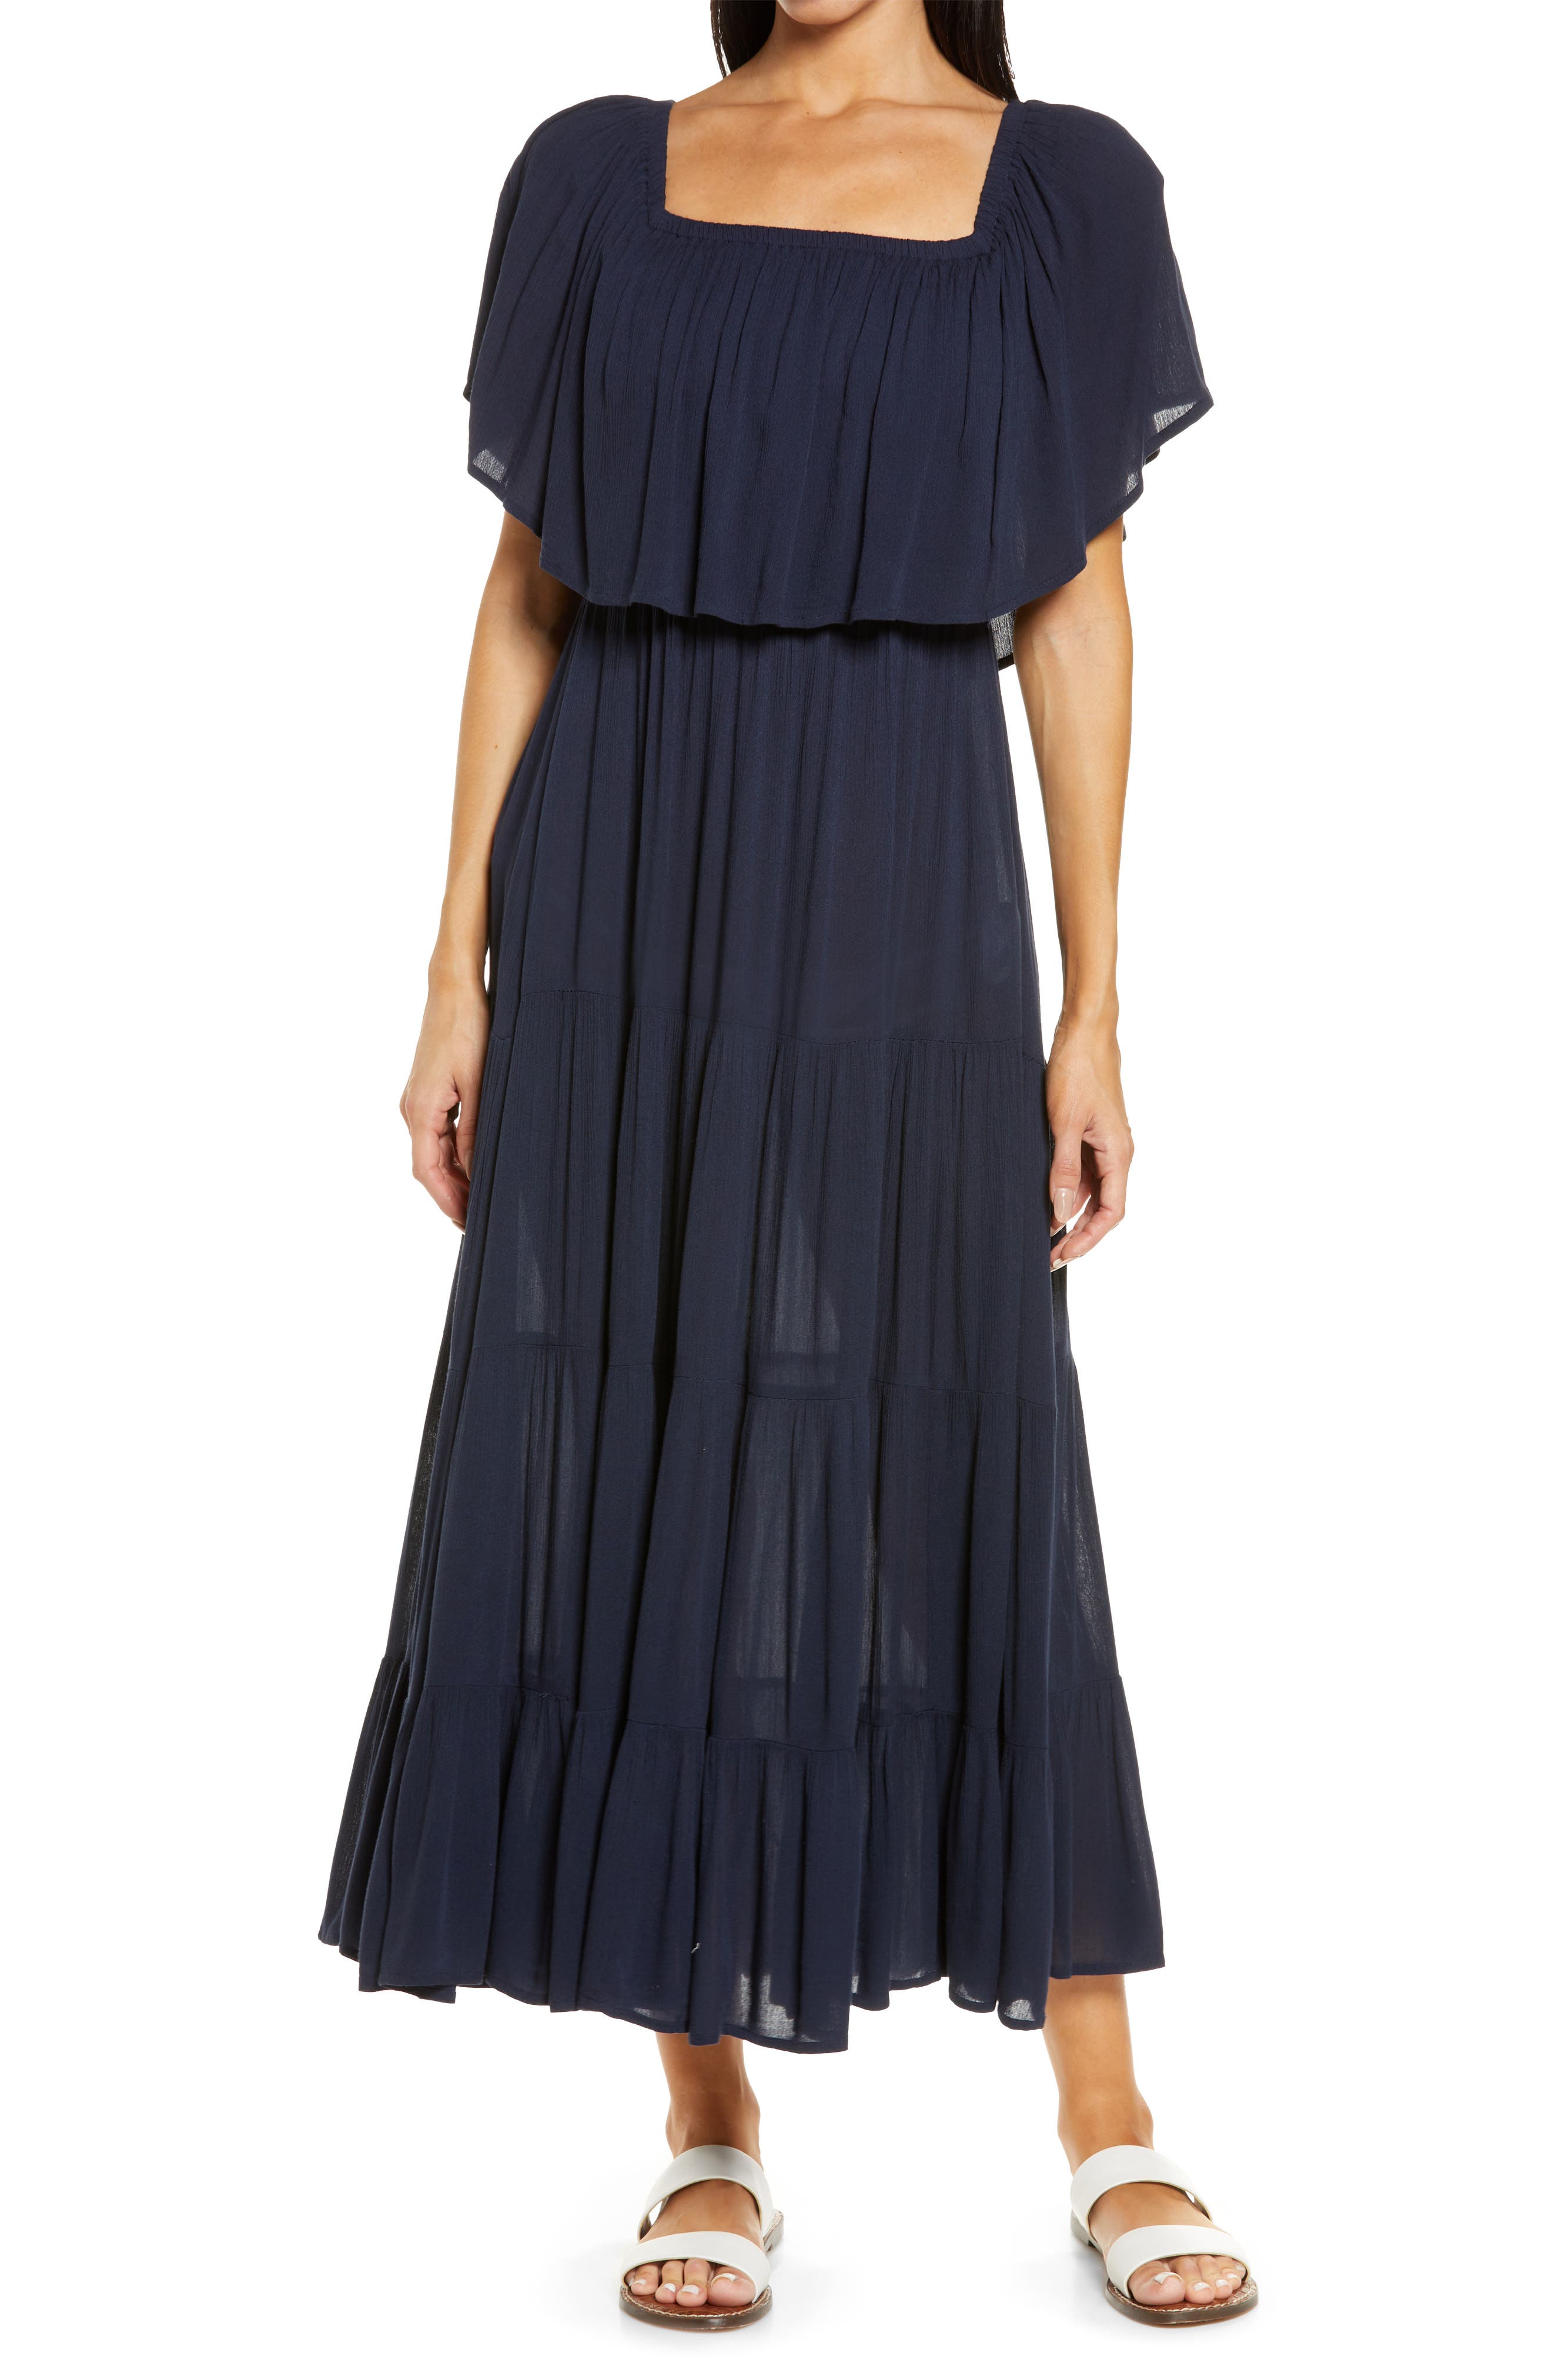 Elan Off the Shoulder Ruffle Cover-Up ...